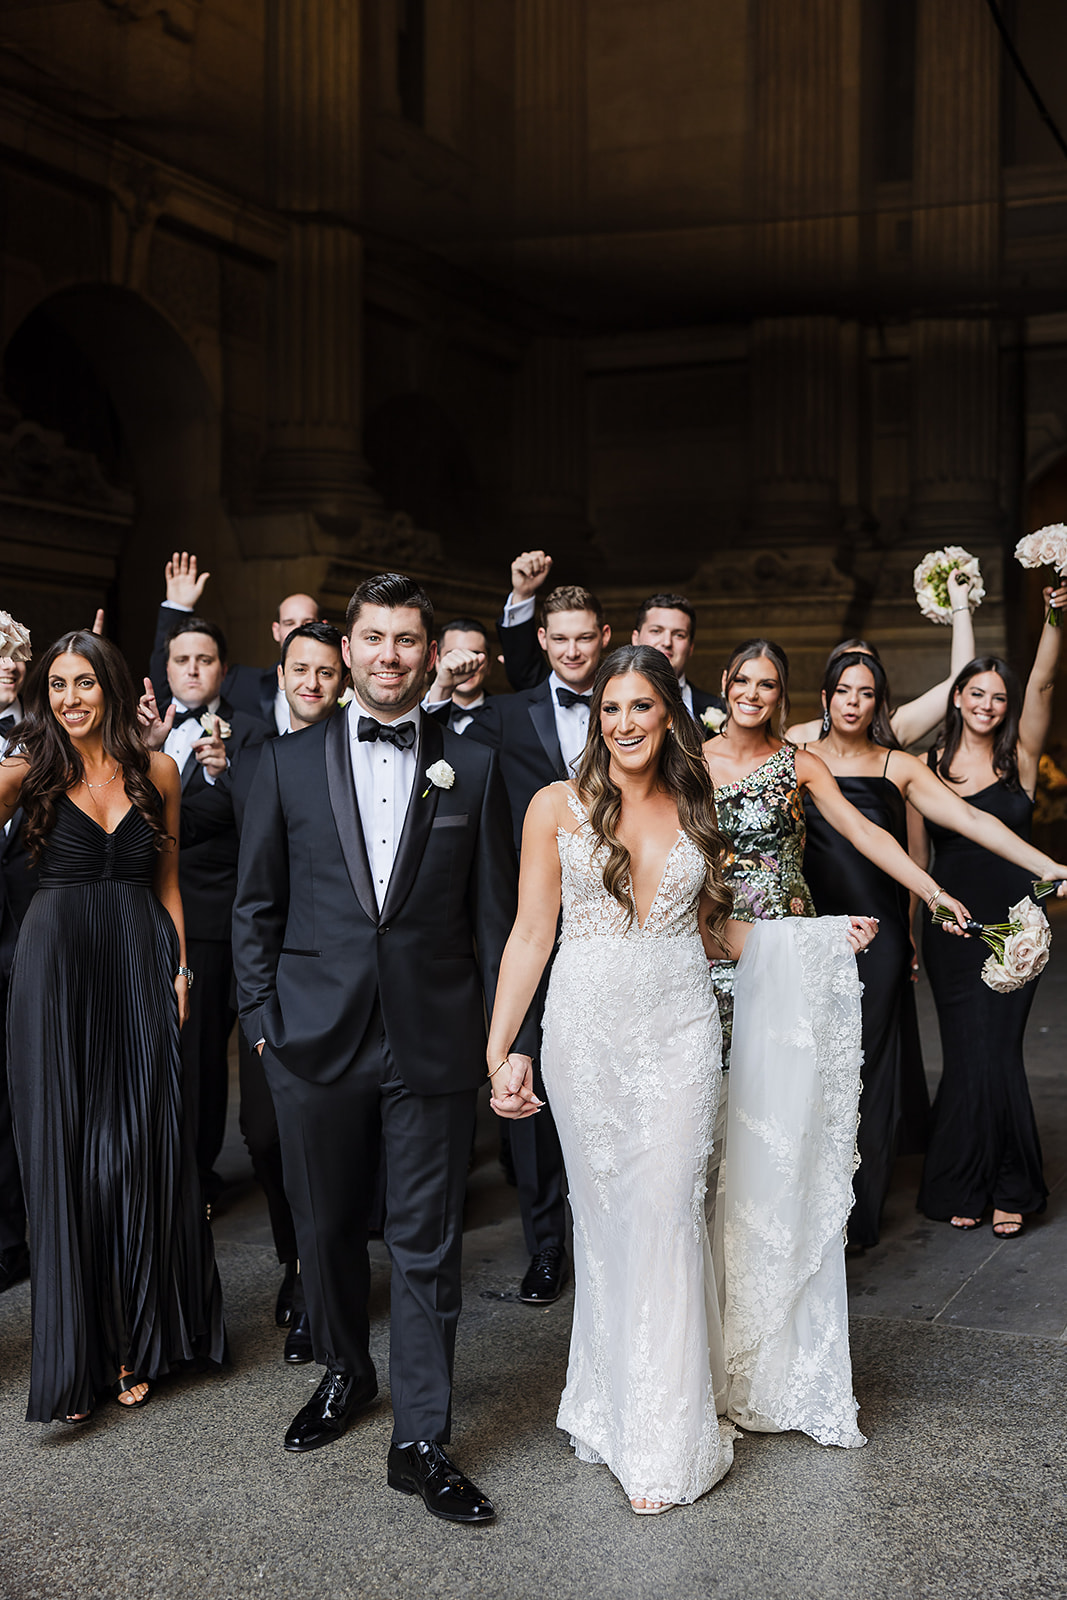 Chic and effortless Bridal Party photos at Philadelphia City Hall for this Crystal Tea Room wedding